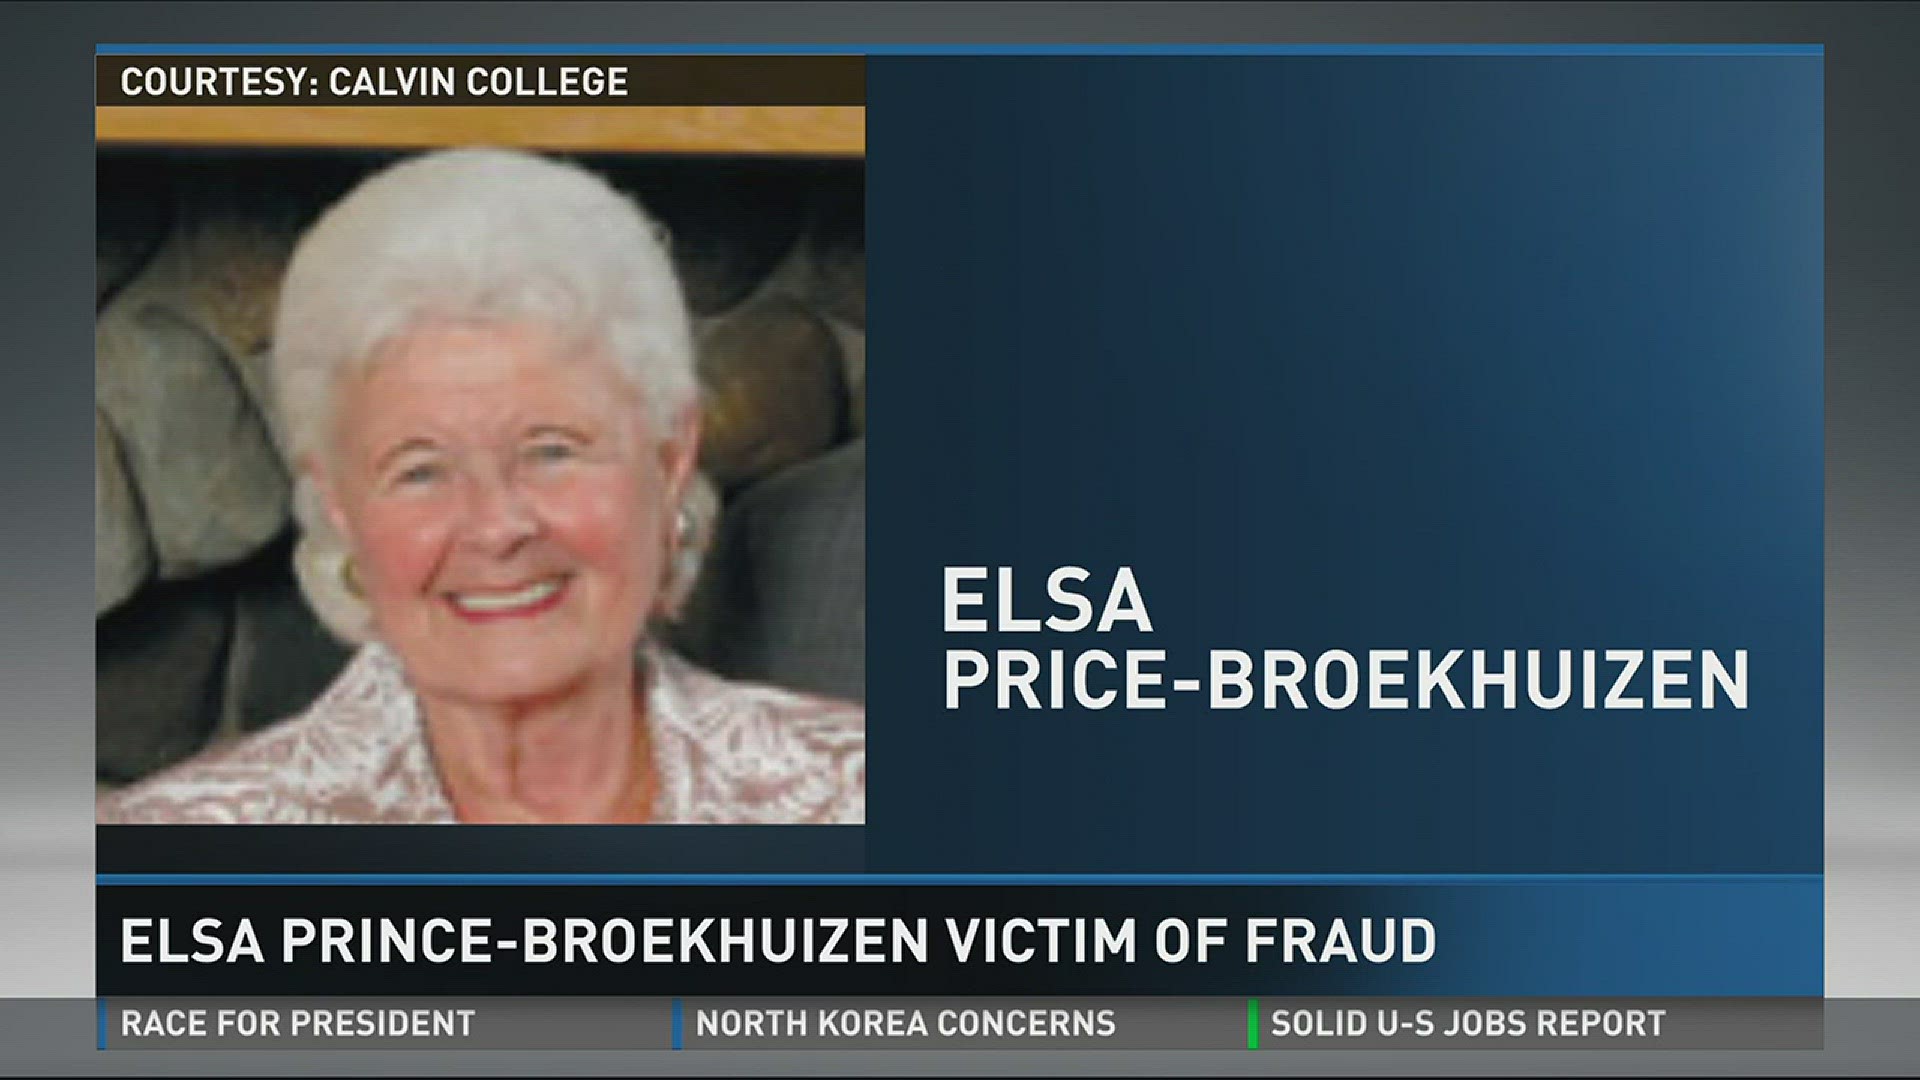 A Holland financial advisor is being charged with bilking Elsa D. Prince-Broekhuizen out of more than $16 million, according to felony information filed today in federal court.